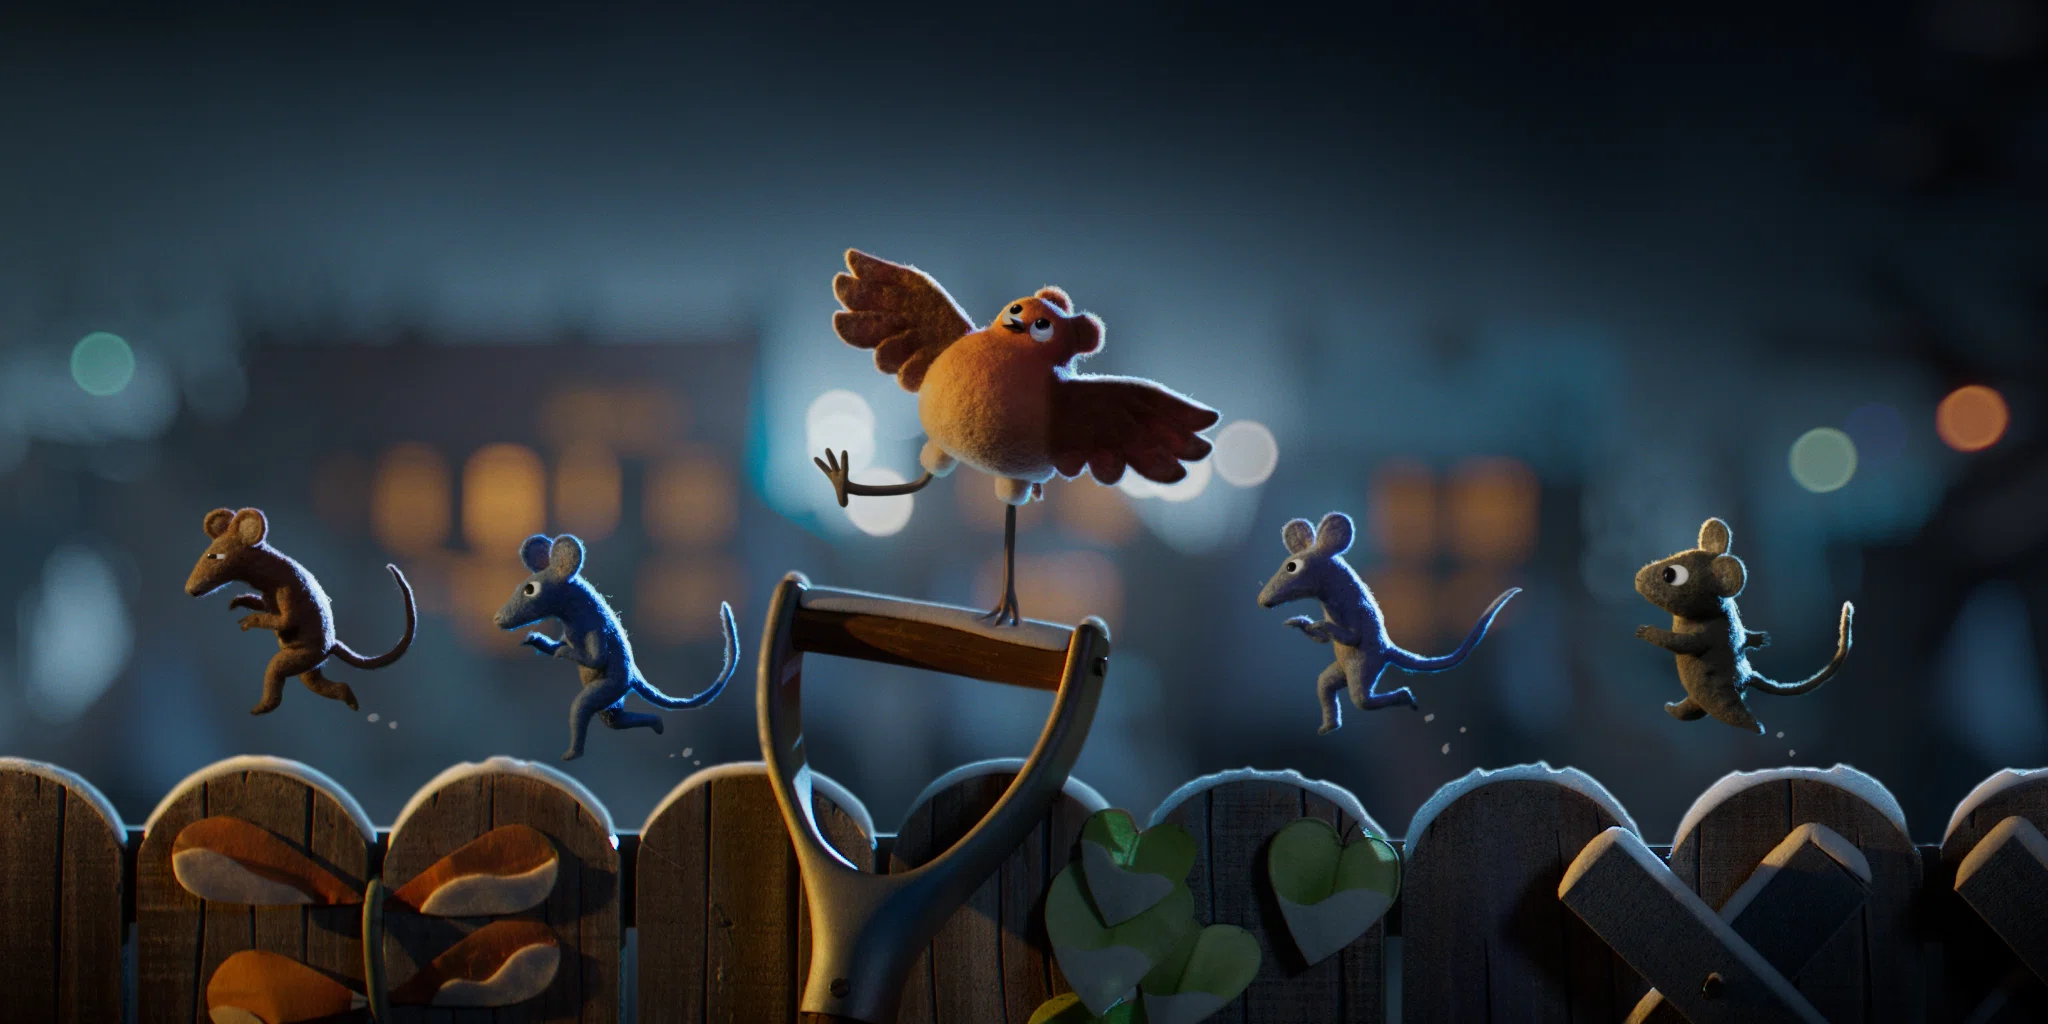 Aardman releases a new Christmas film with Netflix featuring a mischievous  little robin raised by burglar mice